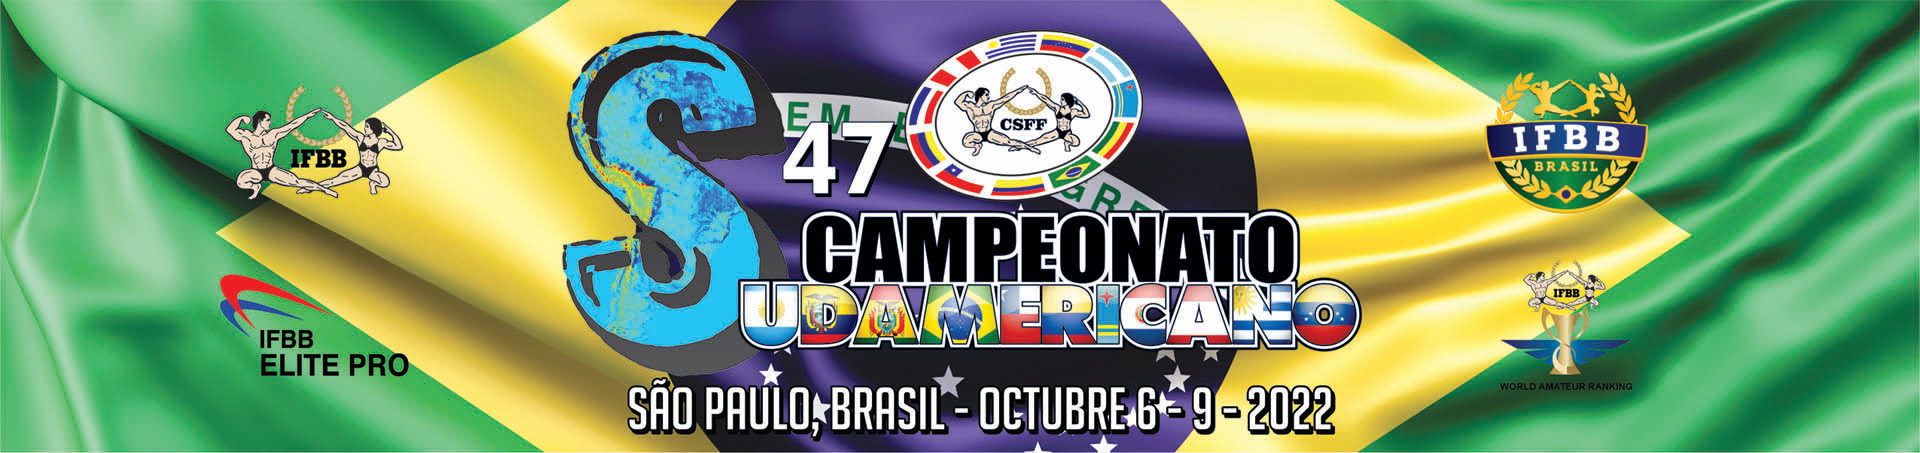 IFBB 47th SOUTH AMERICAN CHAMPIONSHIPS